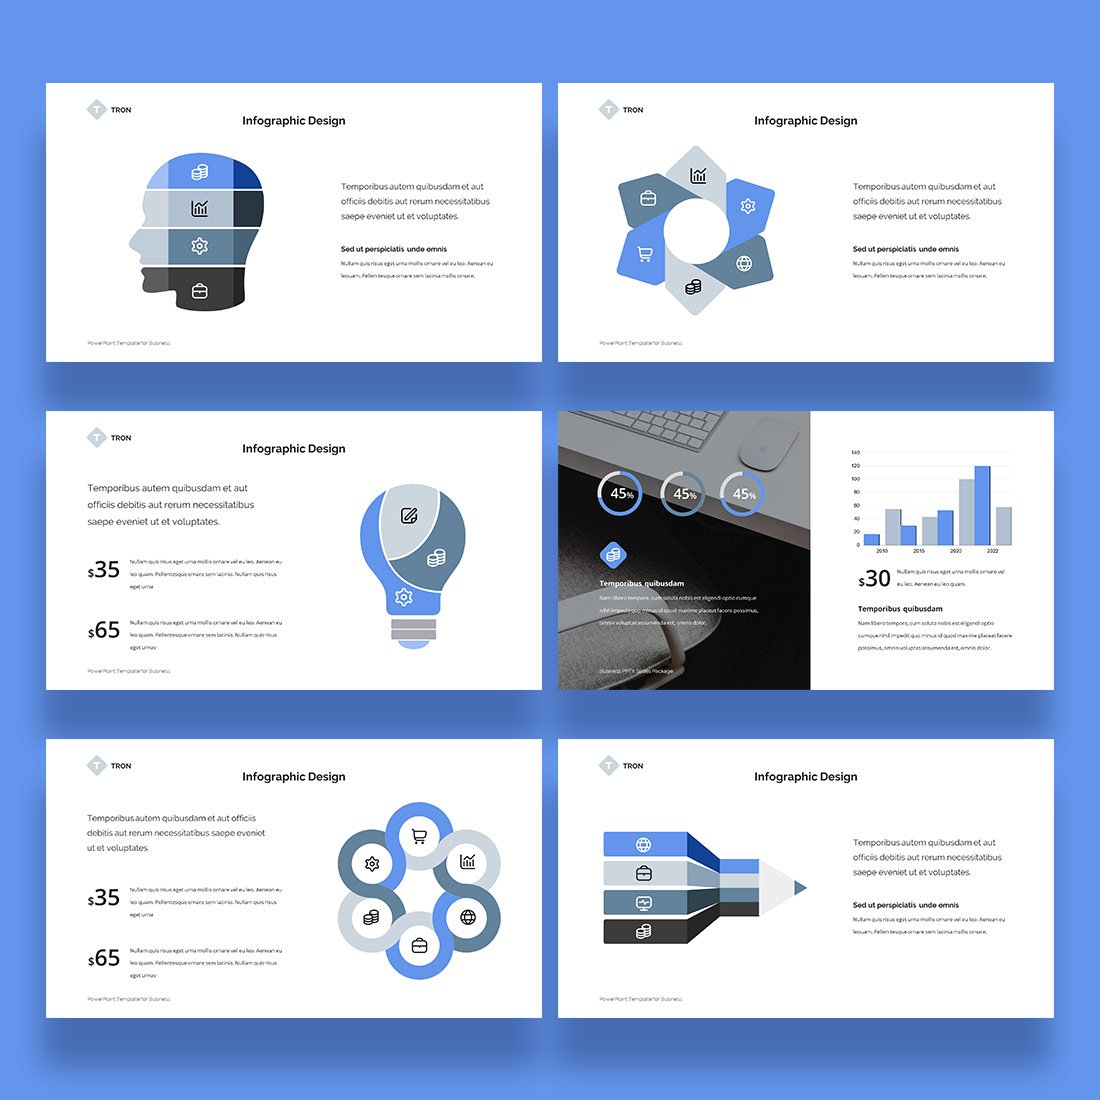 TRON - PowerPoint Presentation for Business pages.